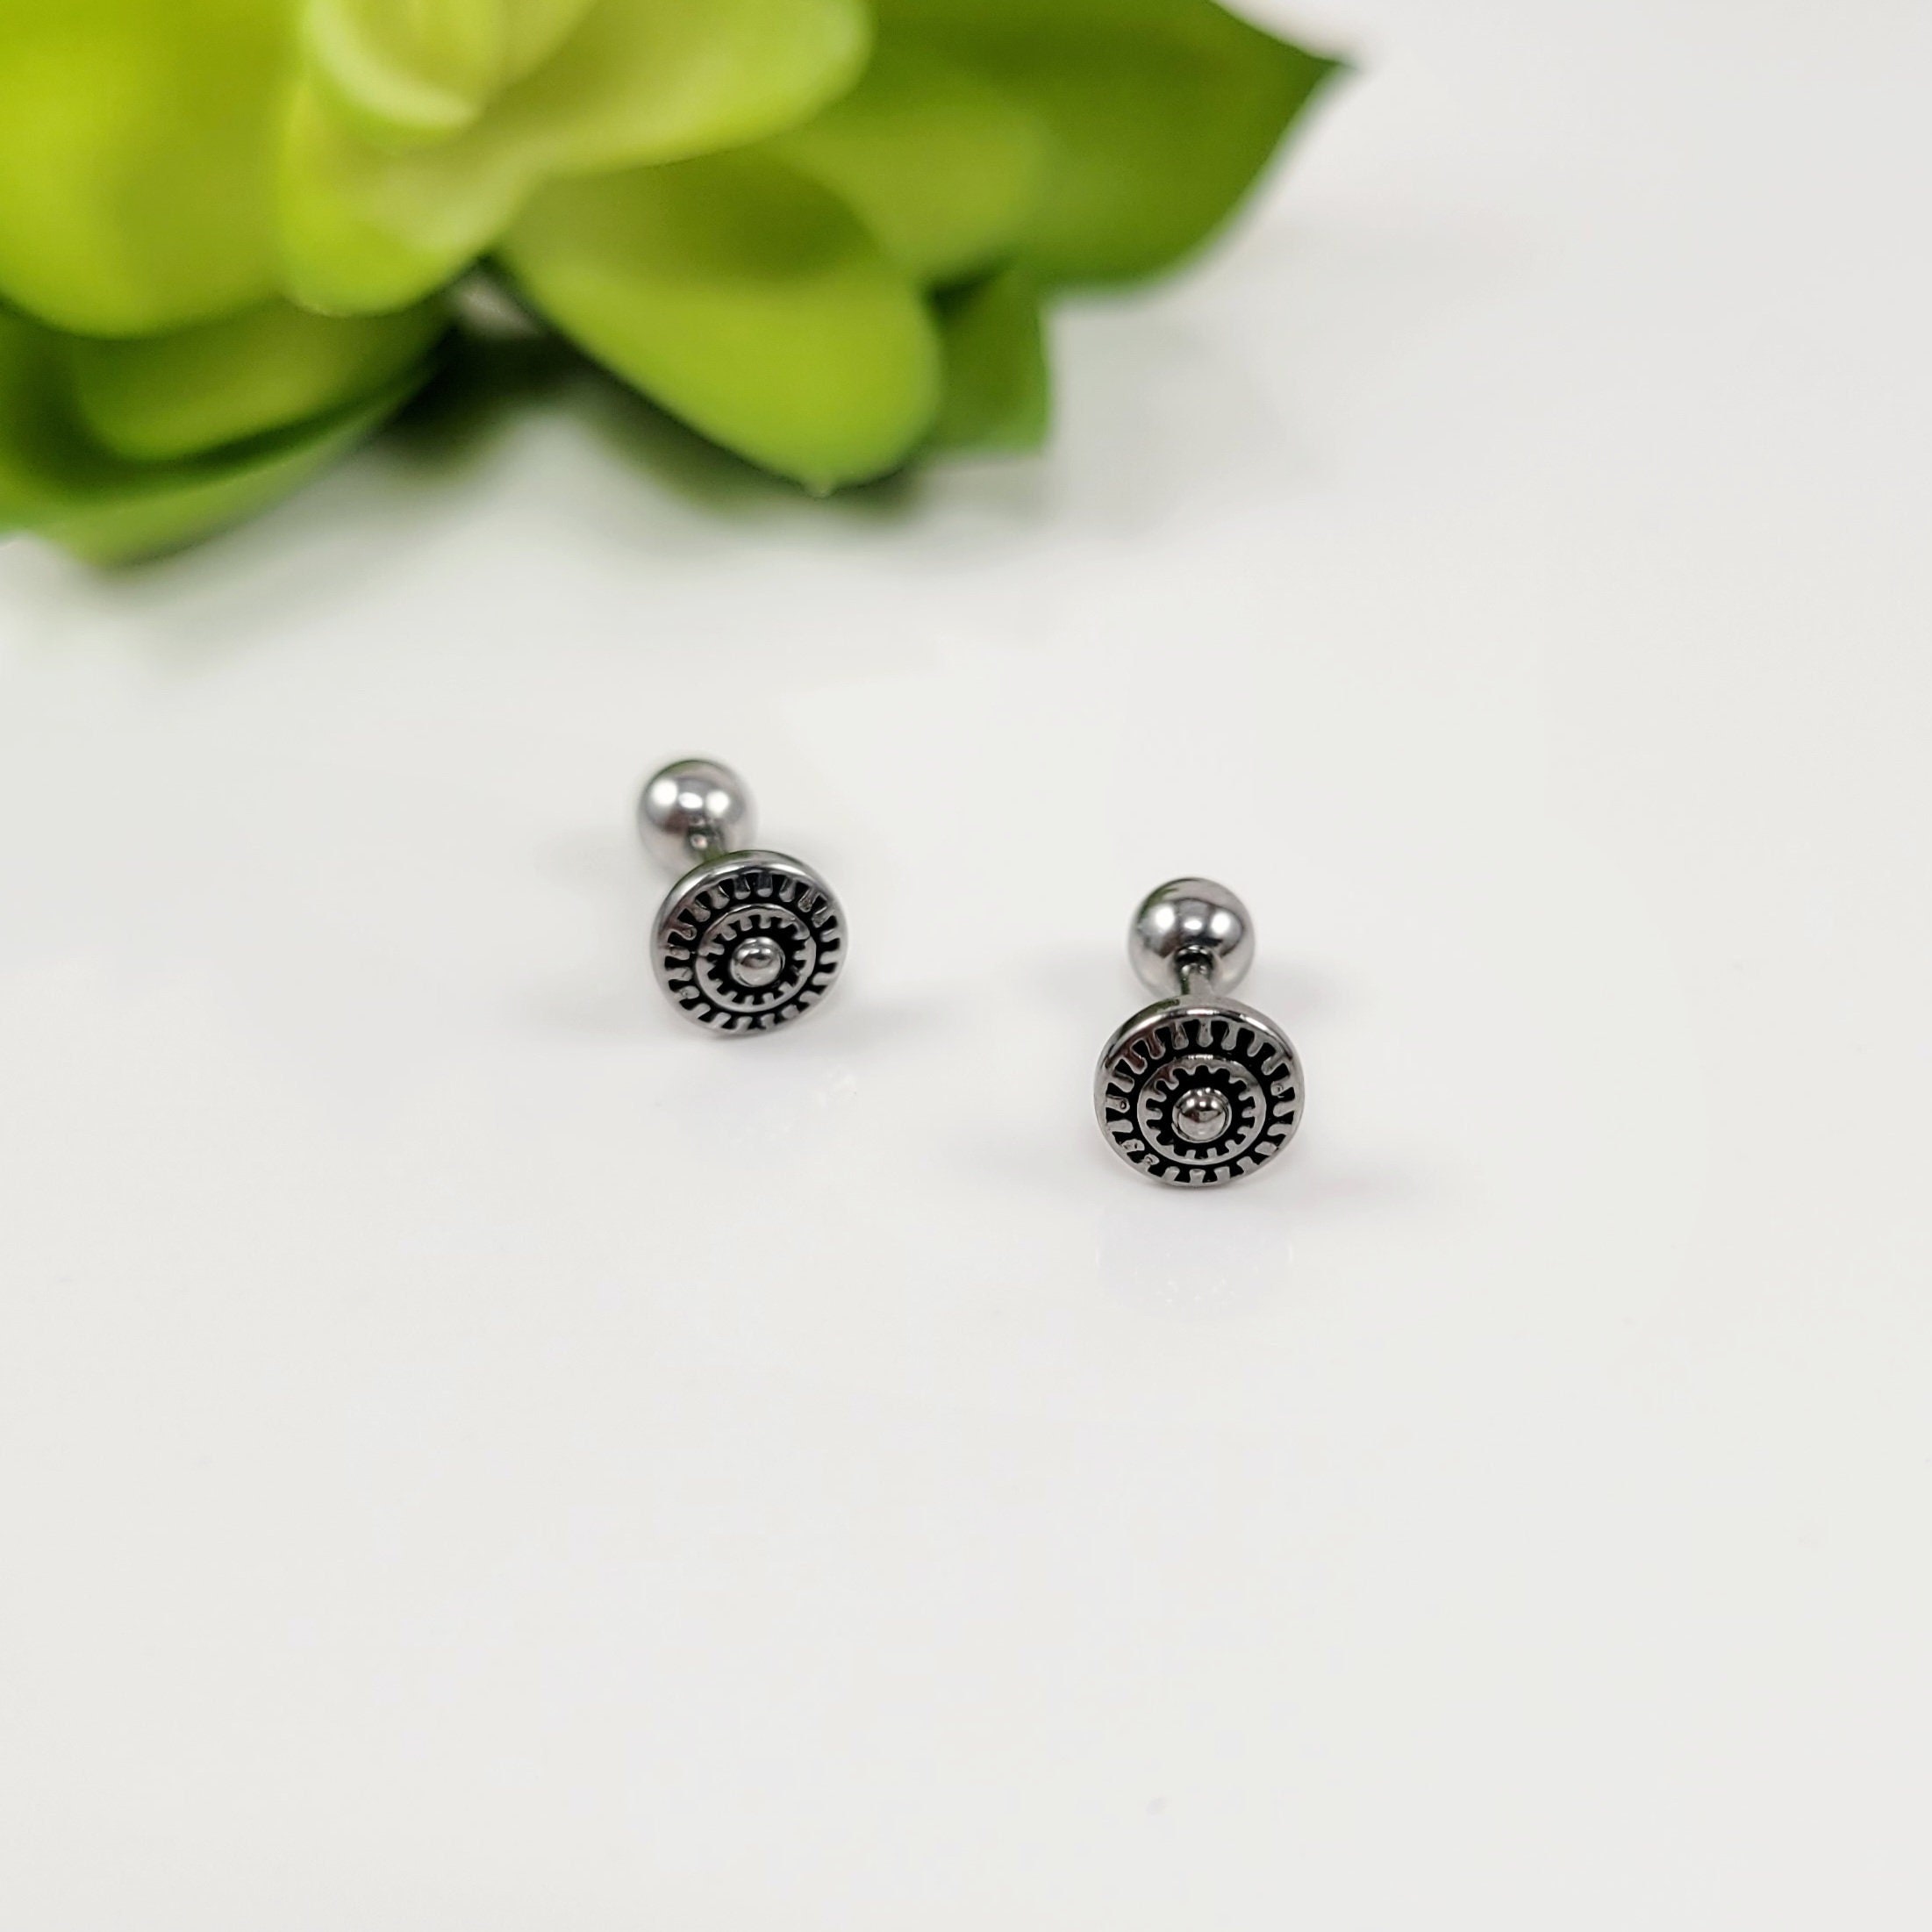 16G Tiny CZ Floral Cartilage Studs/tragus Jewelry/helix Studs/conch  Earring/earlobe Stud/minimalist Earrings/gift for Her/small Earring Stud 